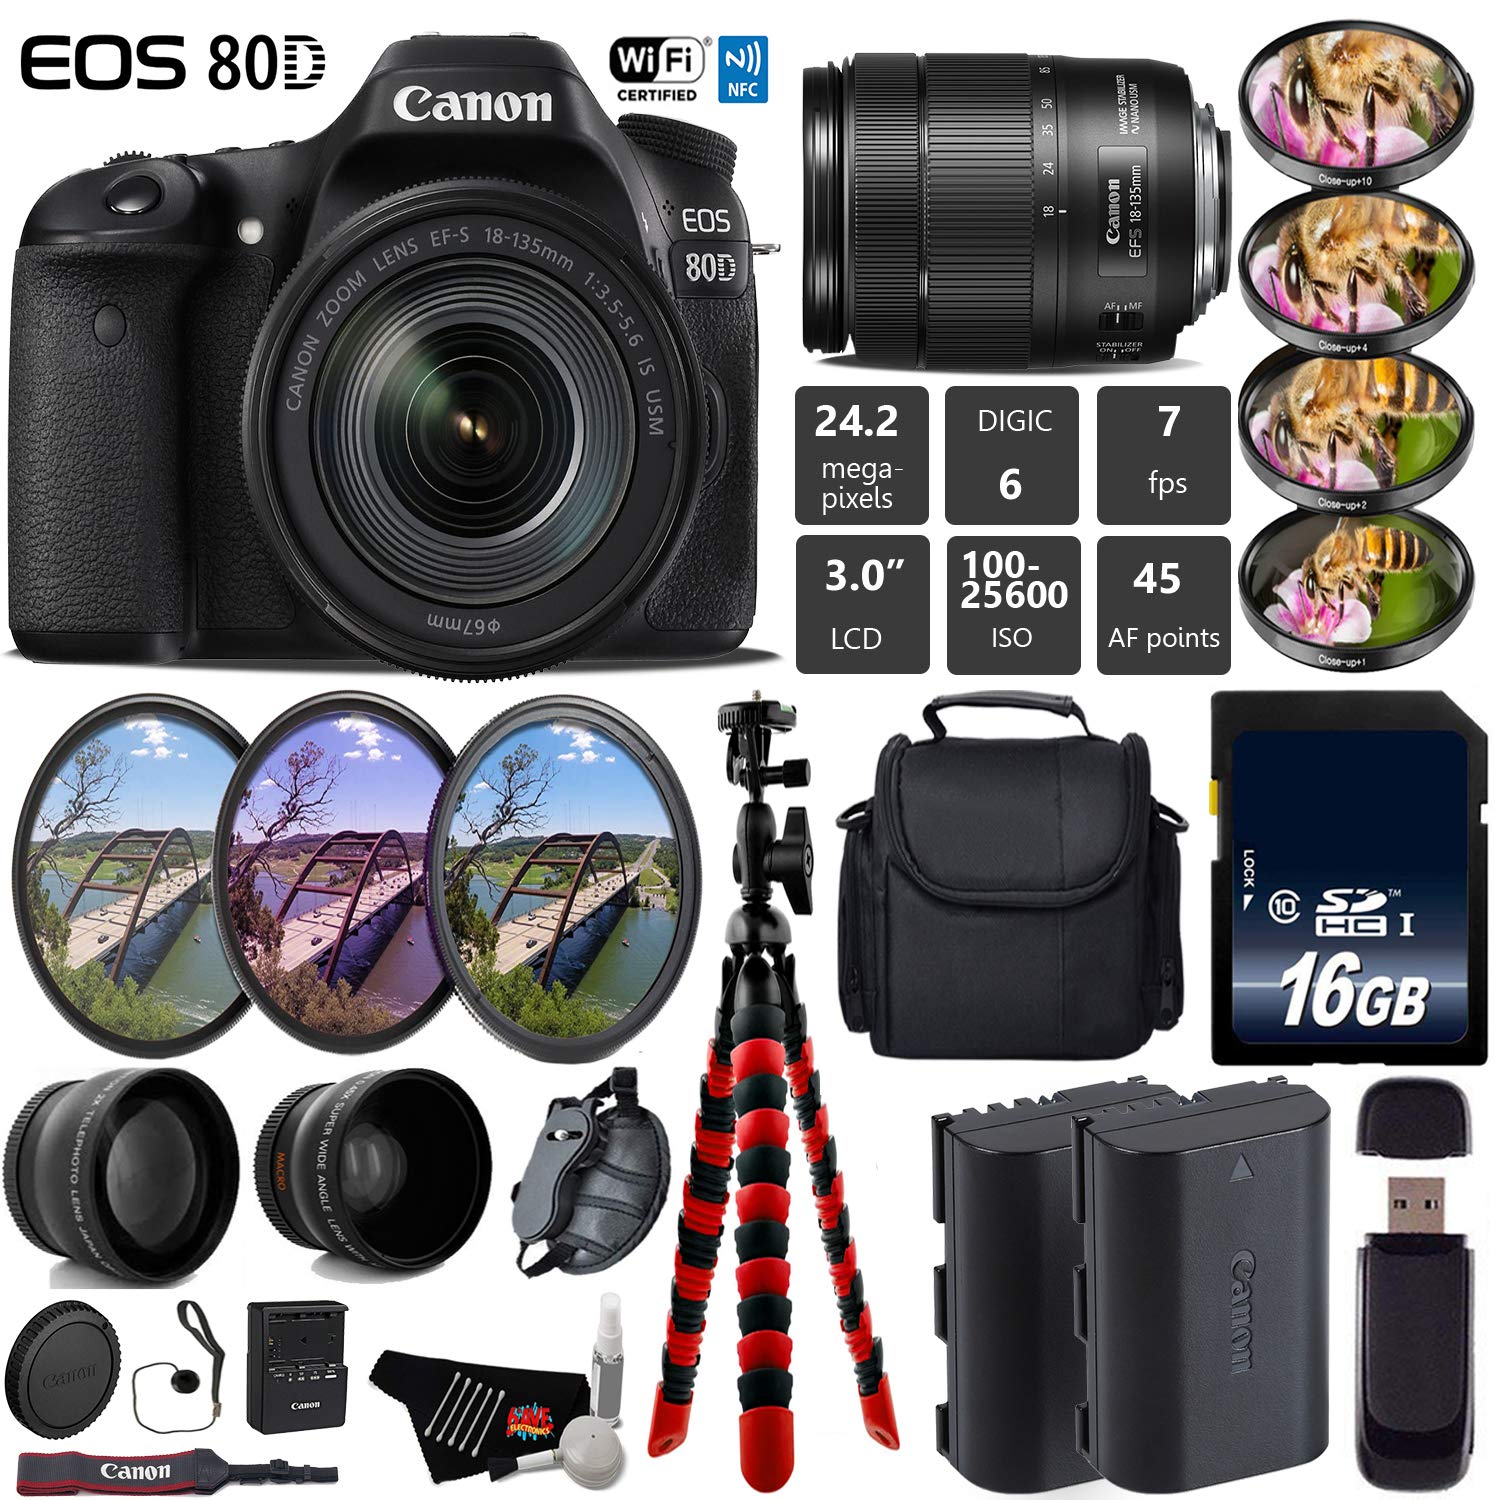 Canon EOS 80D DSLR Camera with 18-135mm is STM Lens + UV FLD CPL Filter Kit + 4 PC Macro Kit + Wide Angle & Telephoto Lens Base Bundle